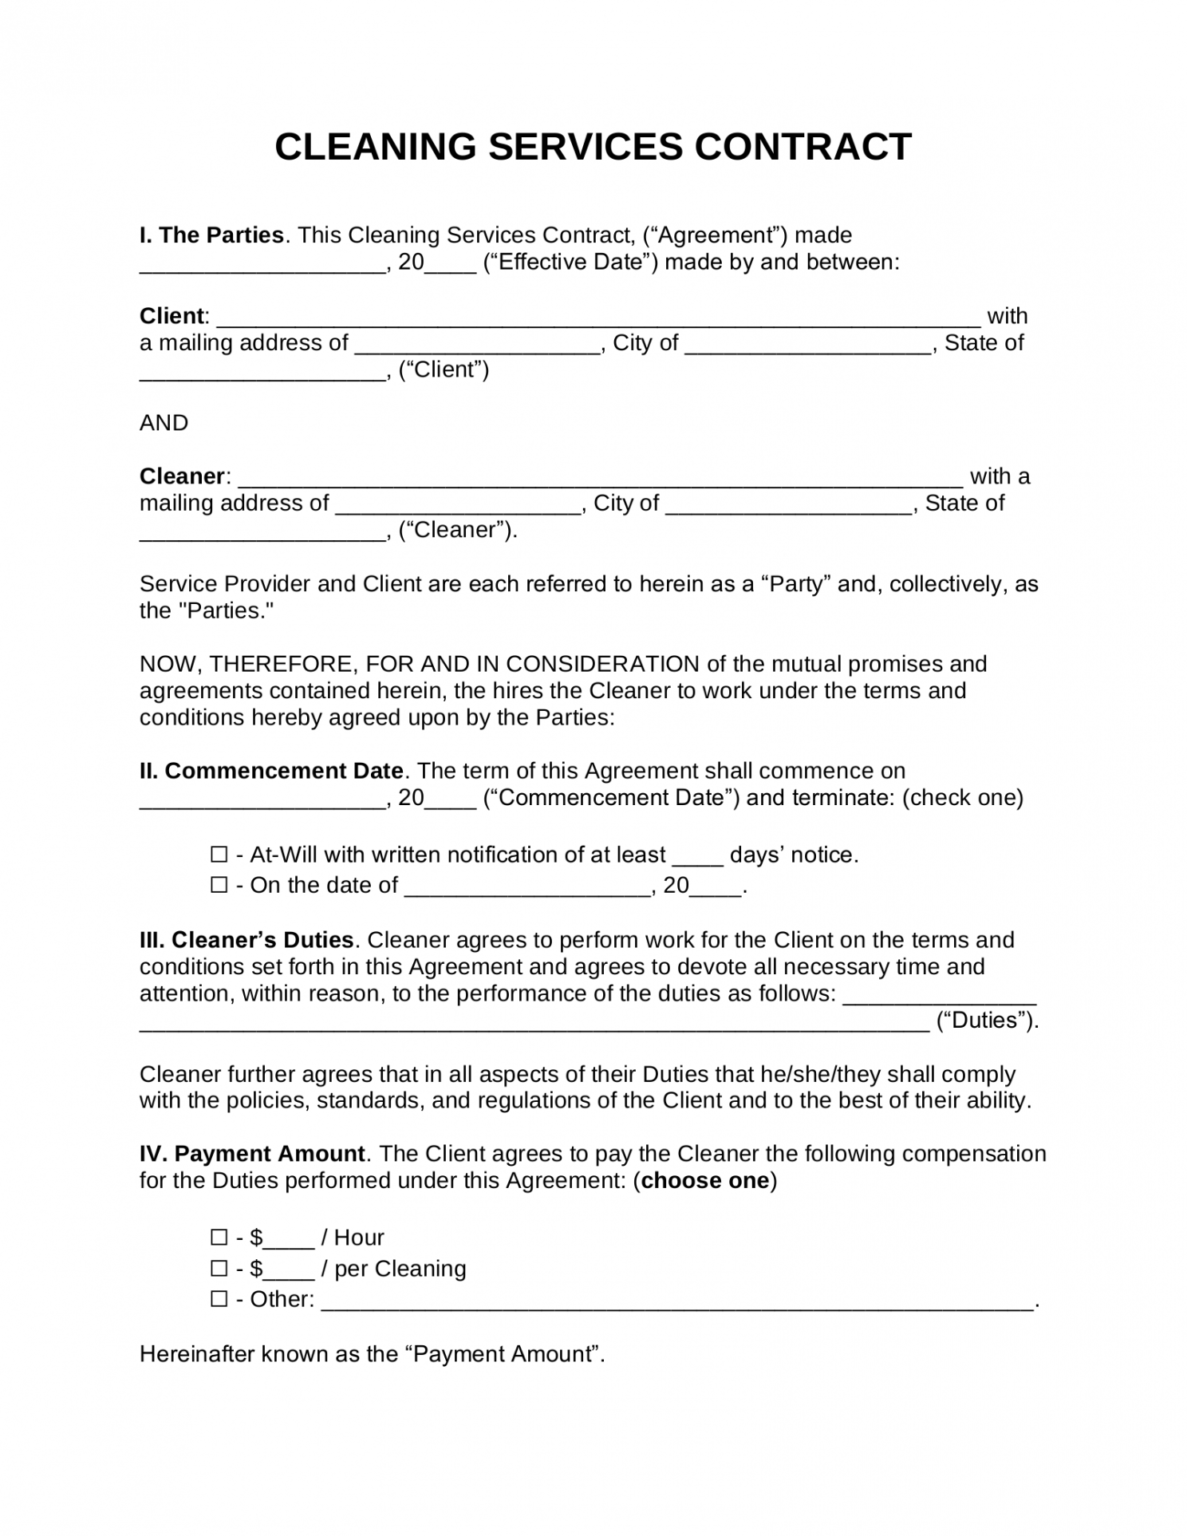 printable-cleaning-contract-template